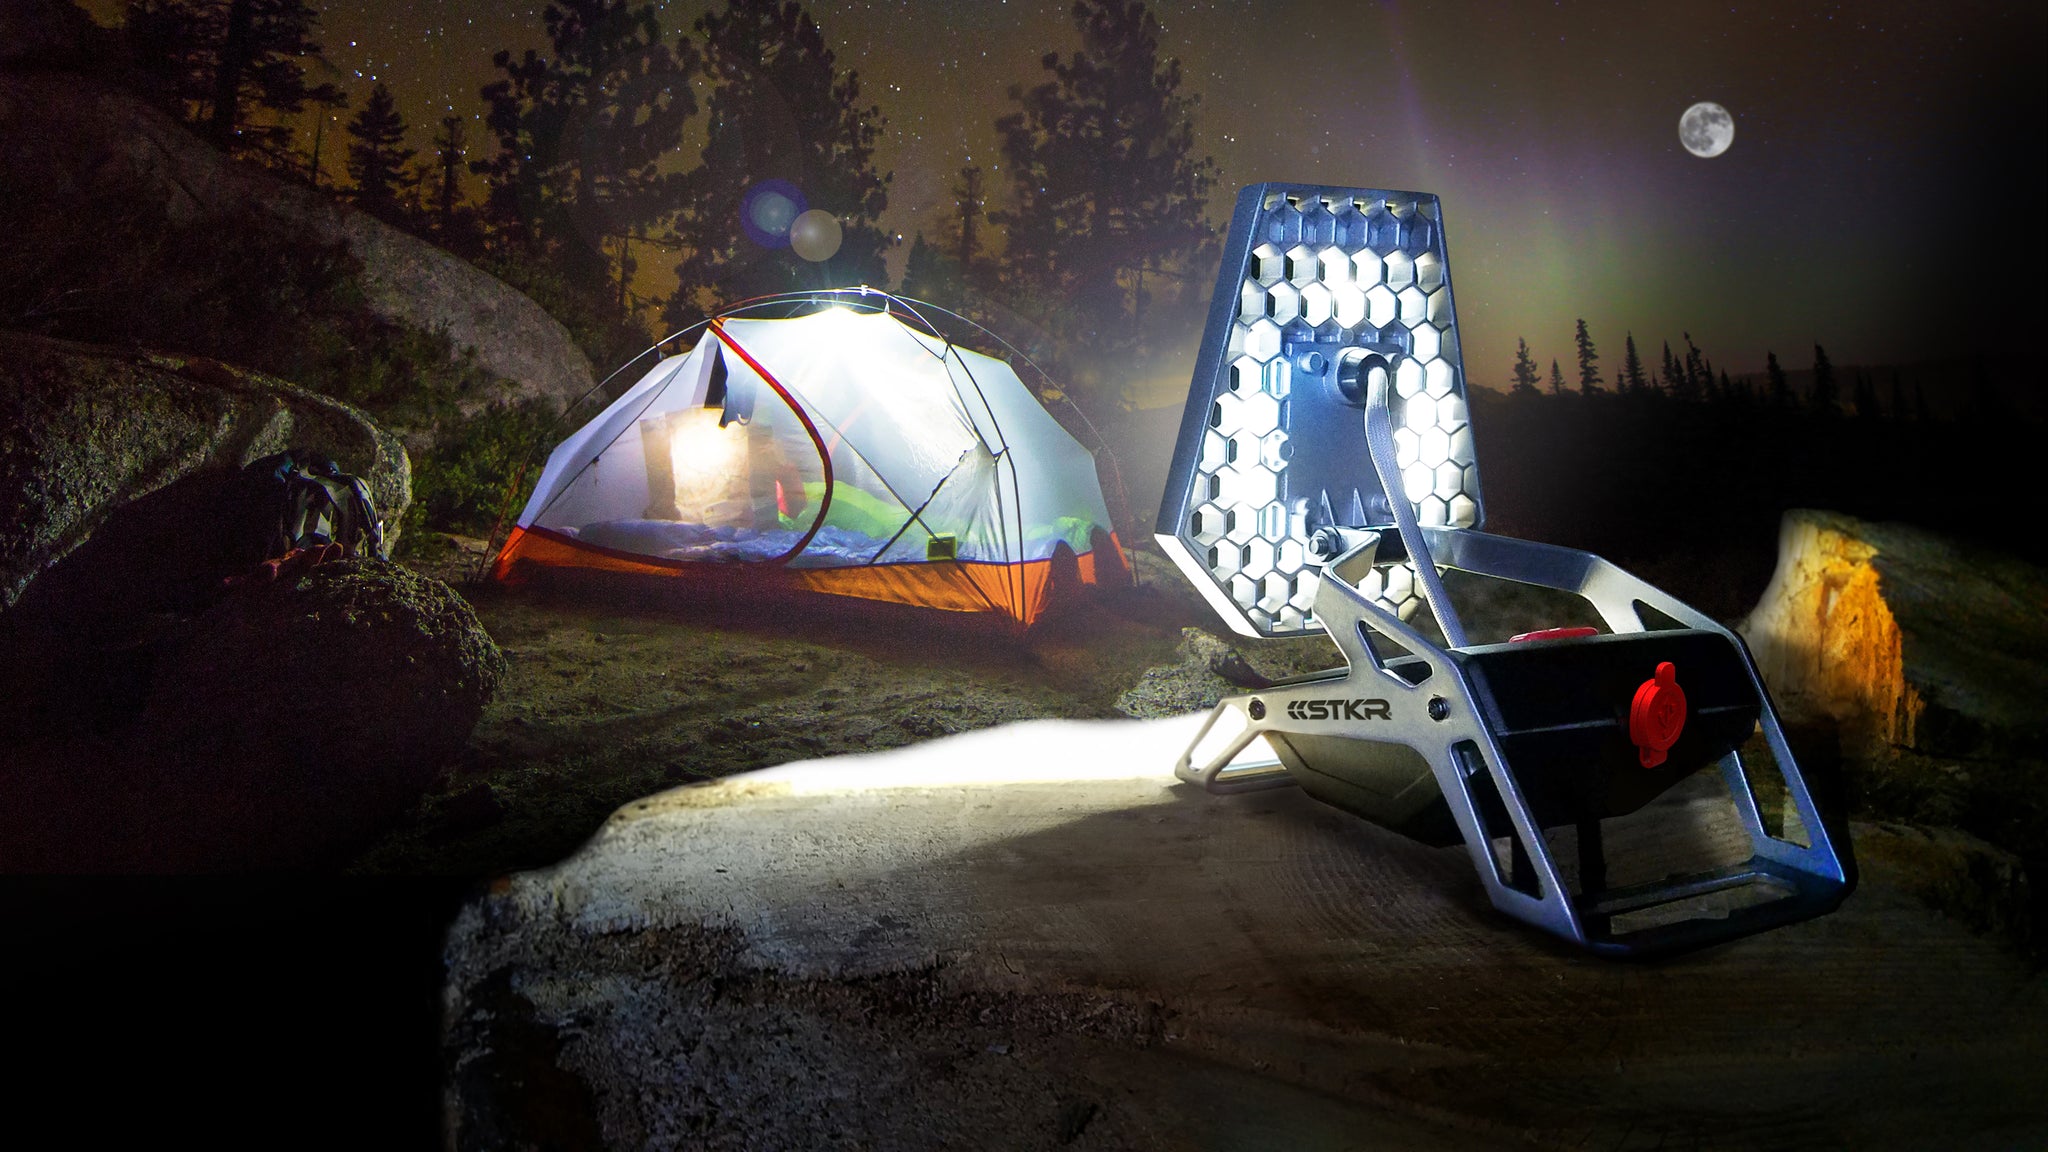 Camping LED Lights Buying Guide